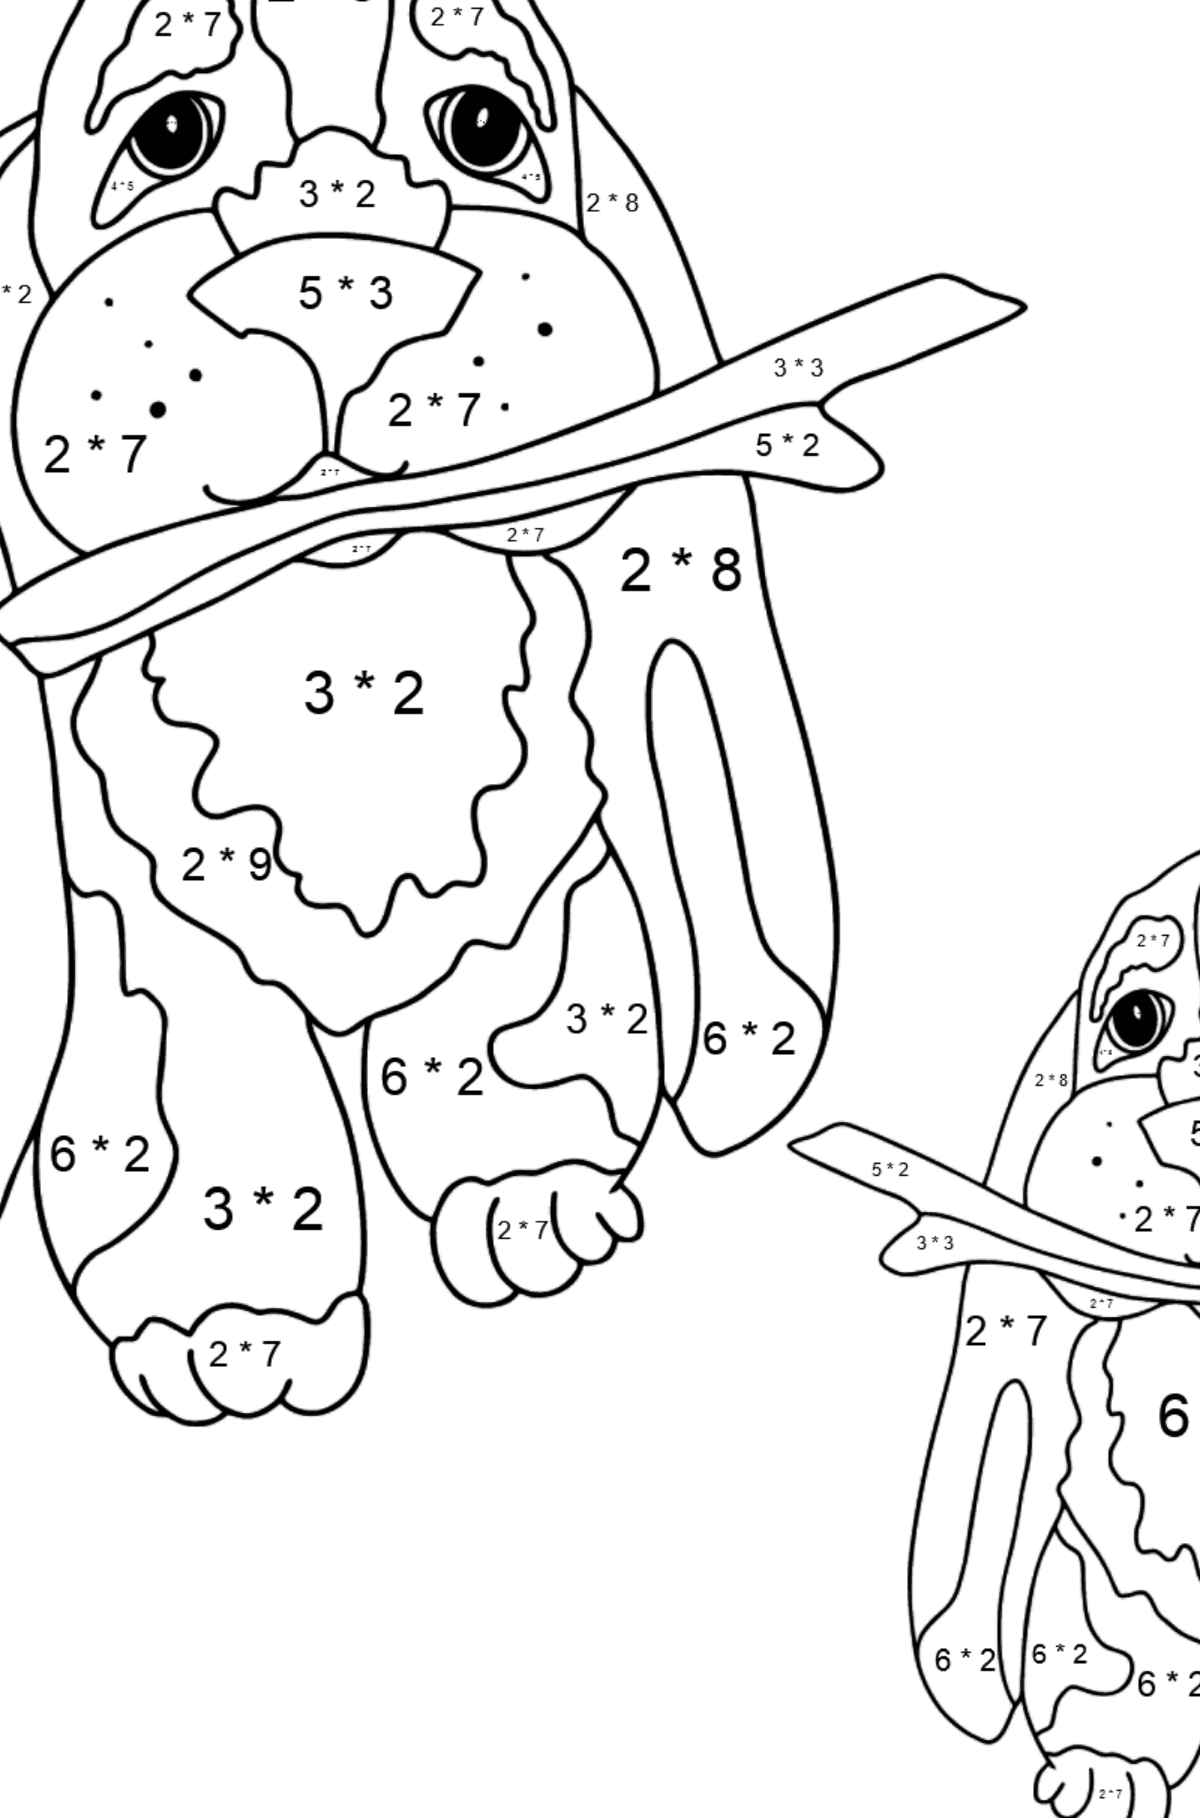 Coloring Page - Two Dogs are Playing with Sticks - Math Coloring - Multiplication for Kids